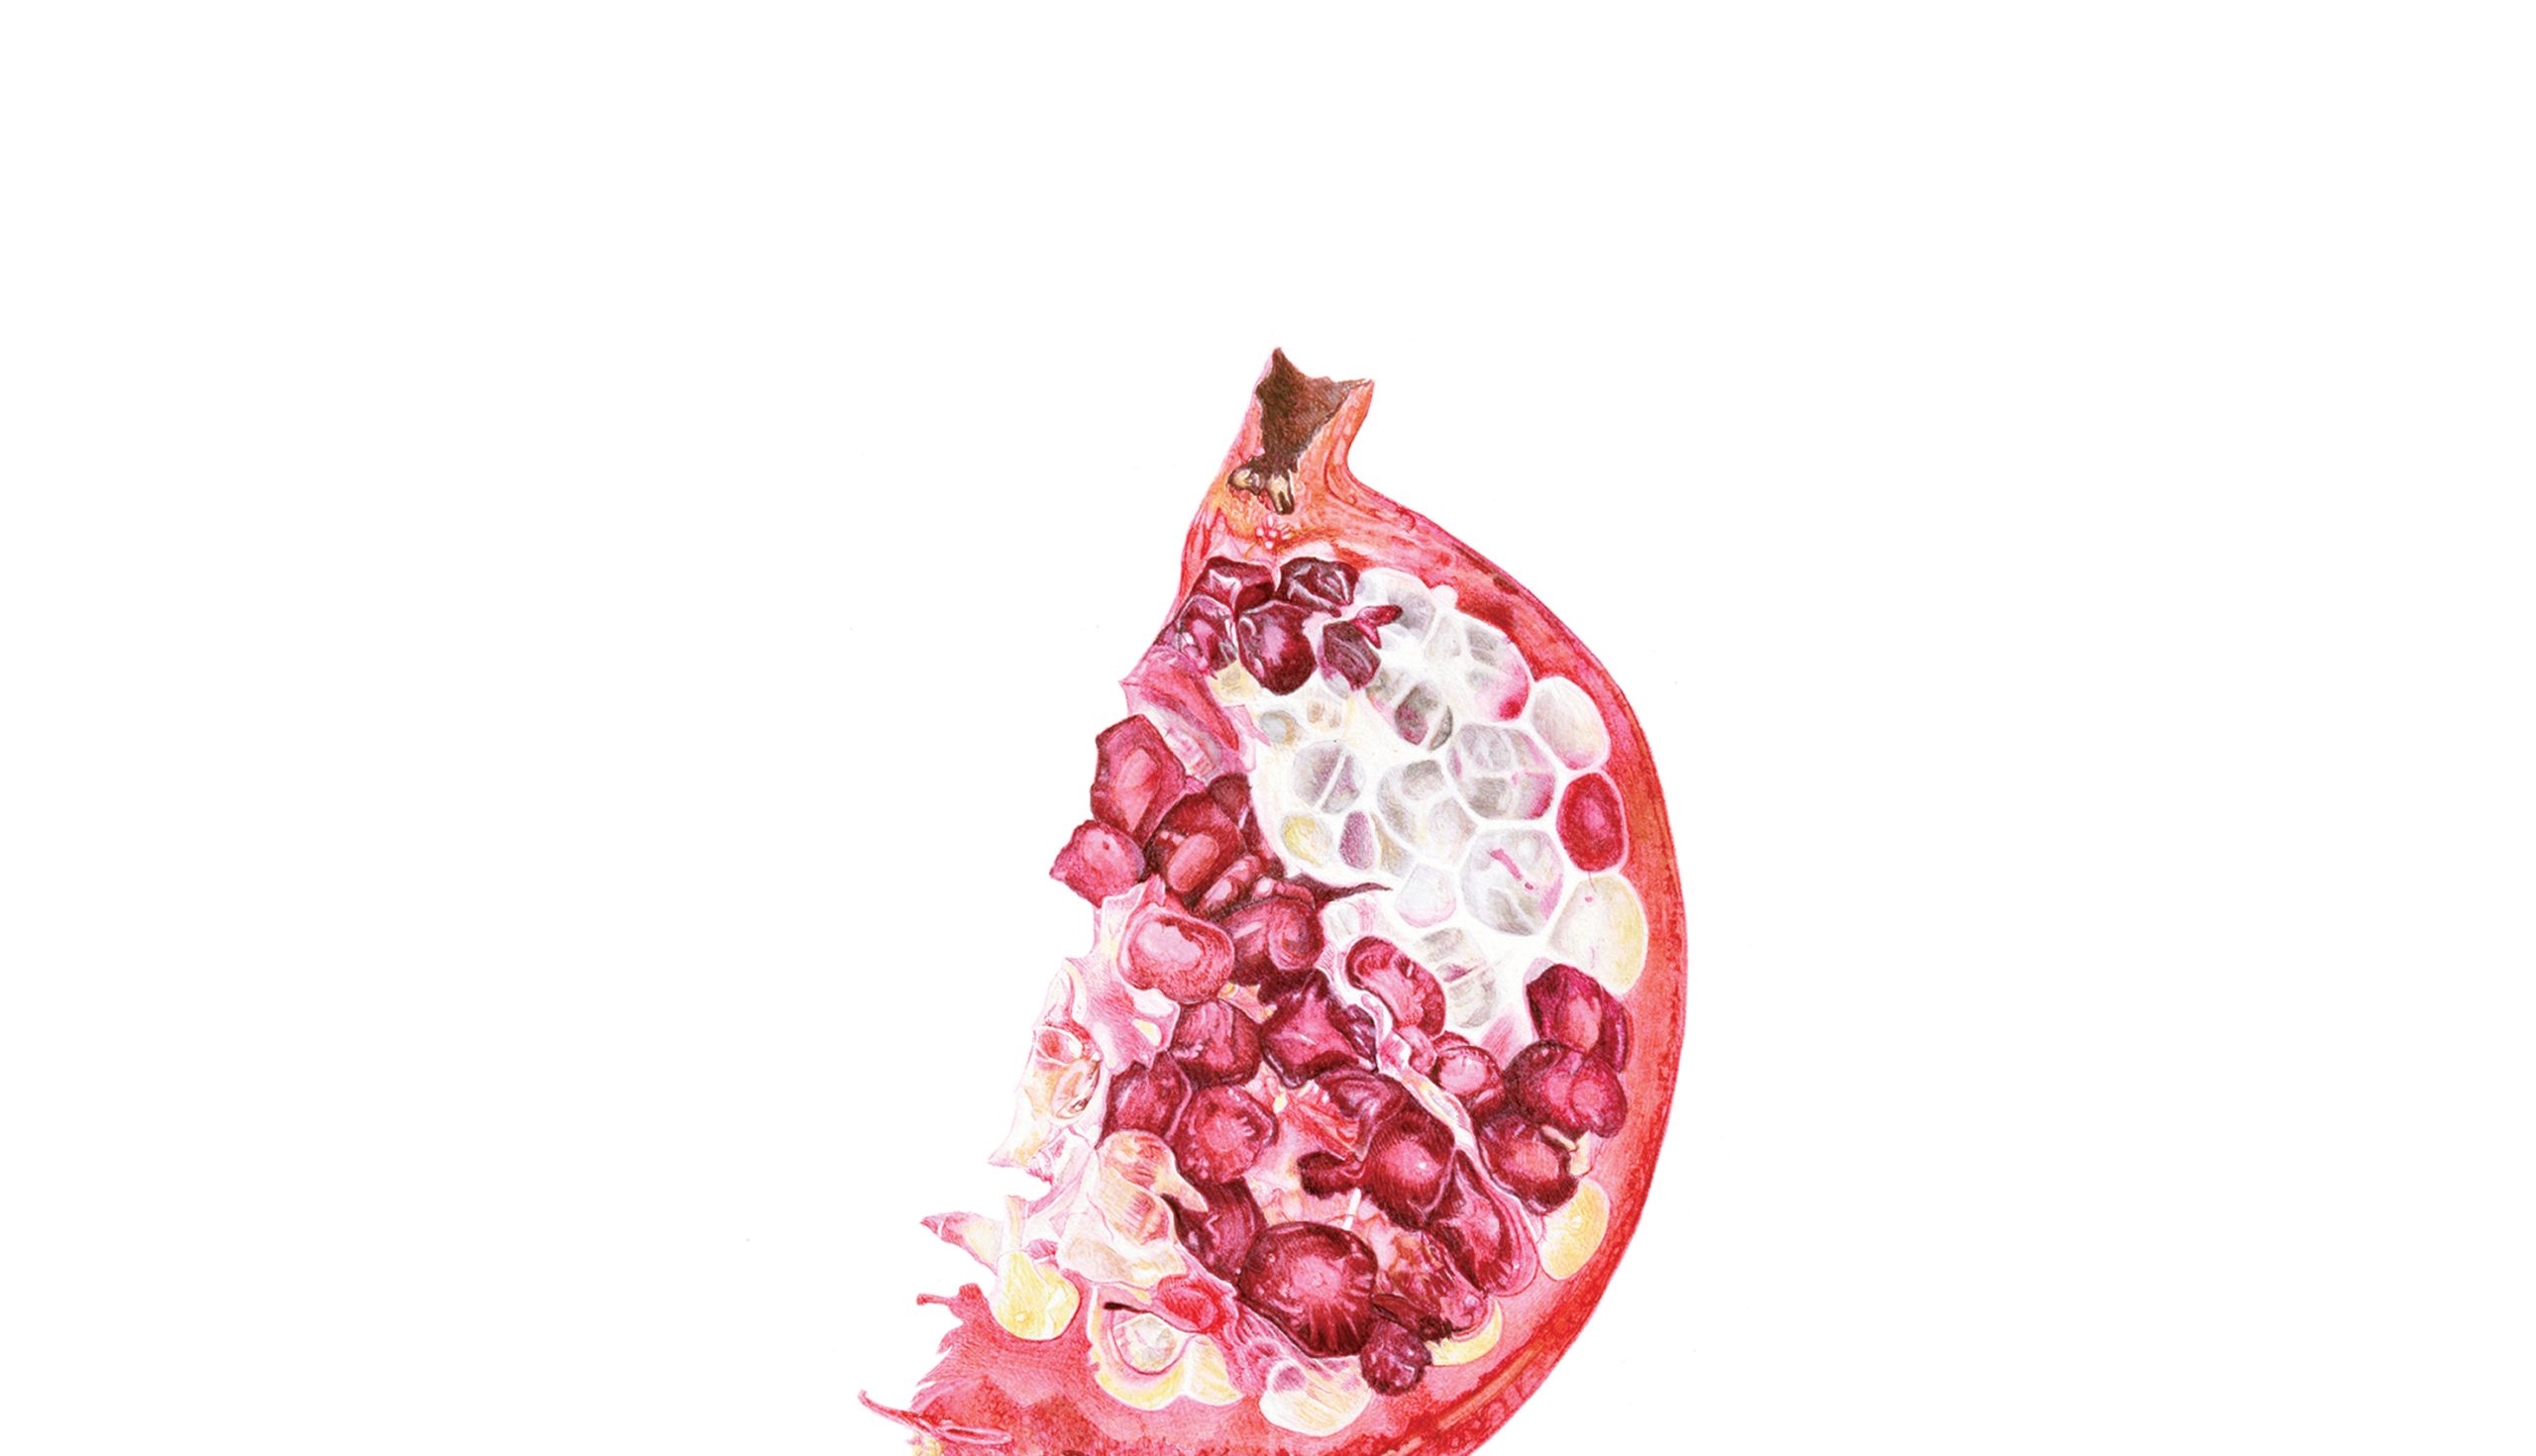 Small Things - Pomegranate Slice - watercolour on Fabriano 5 by Marianne Hazlewood